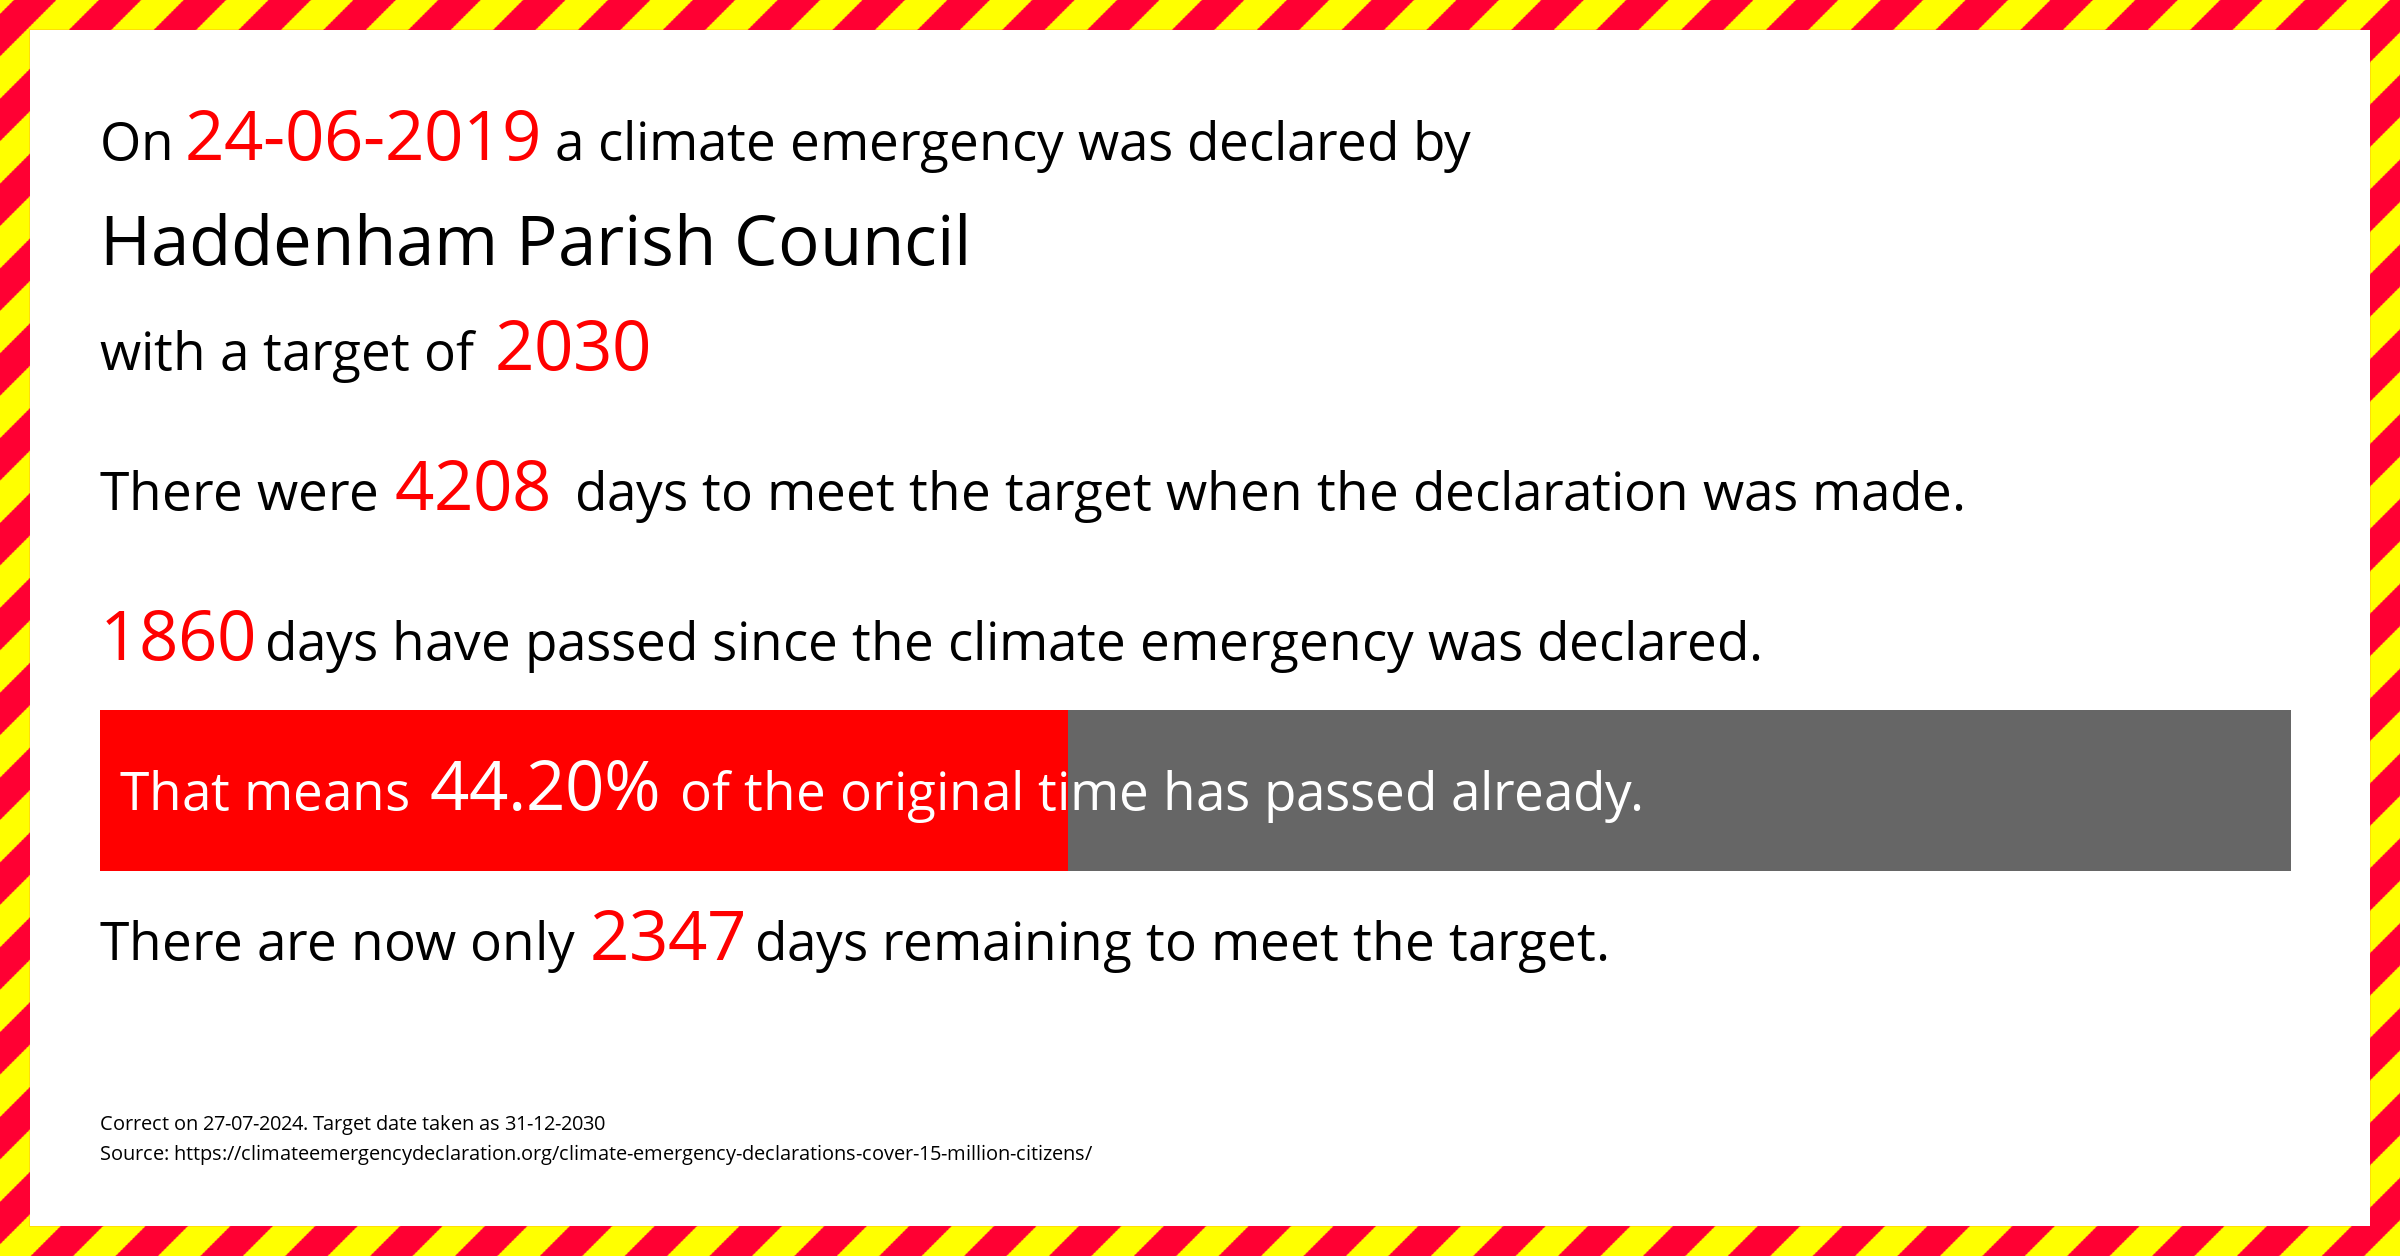 Haddenham Parish Council declared a Climate emergency on Monday 24th June 2019, with a target of 2030.